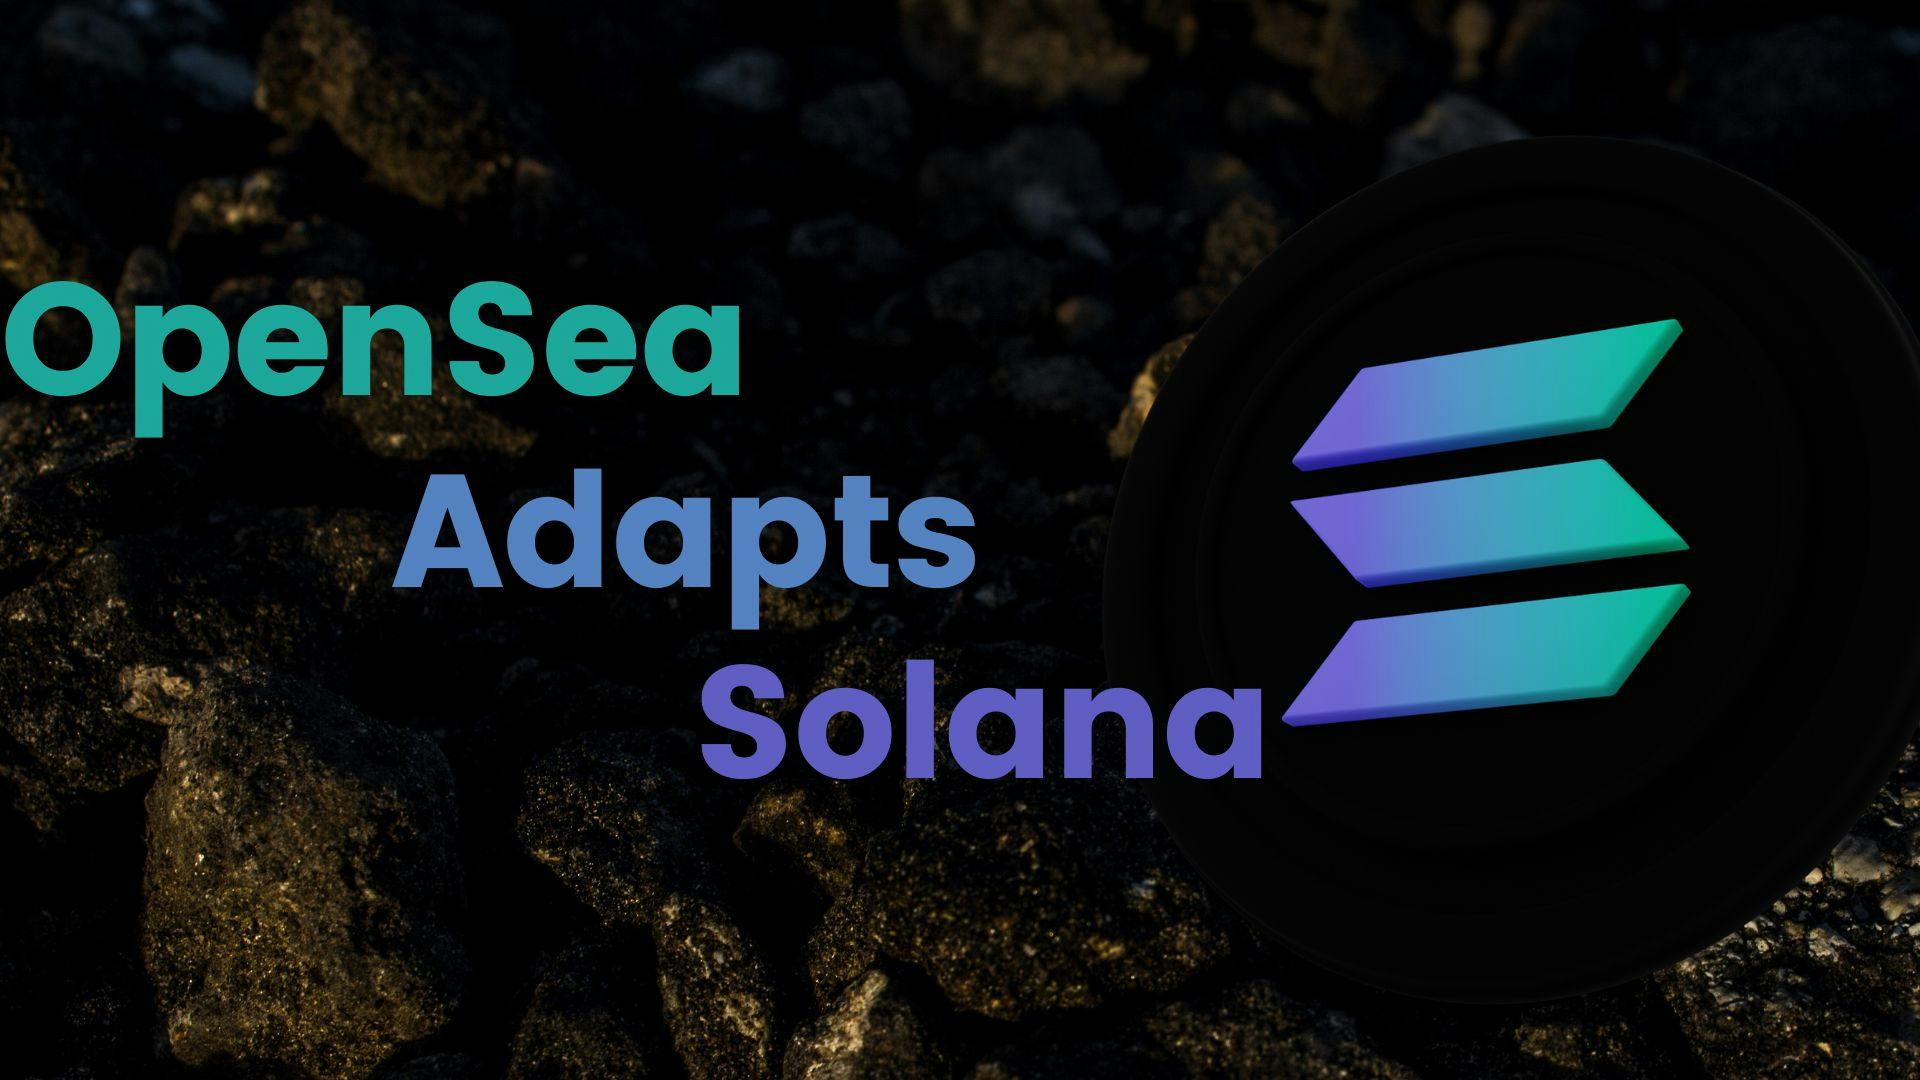 featured image - OpenSea to adapt Solana - Success of OpenSea and NFT